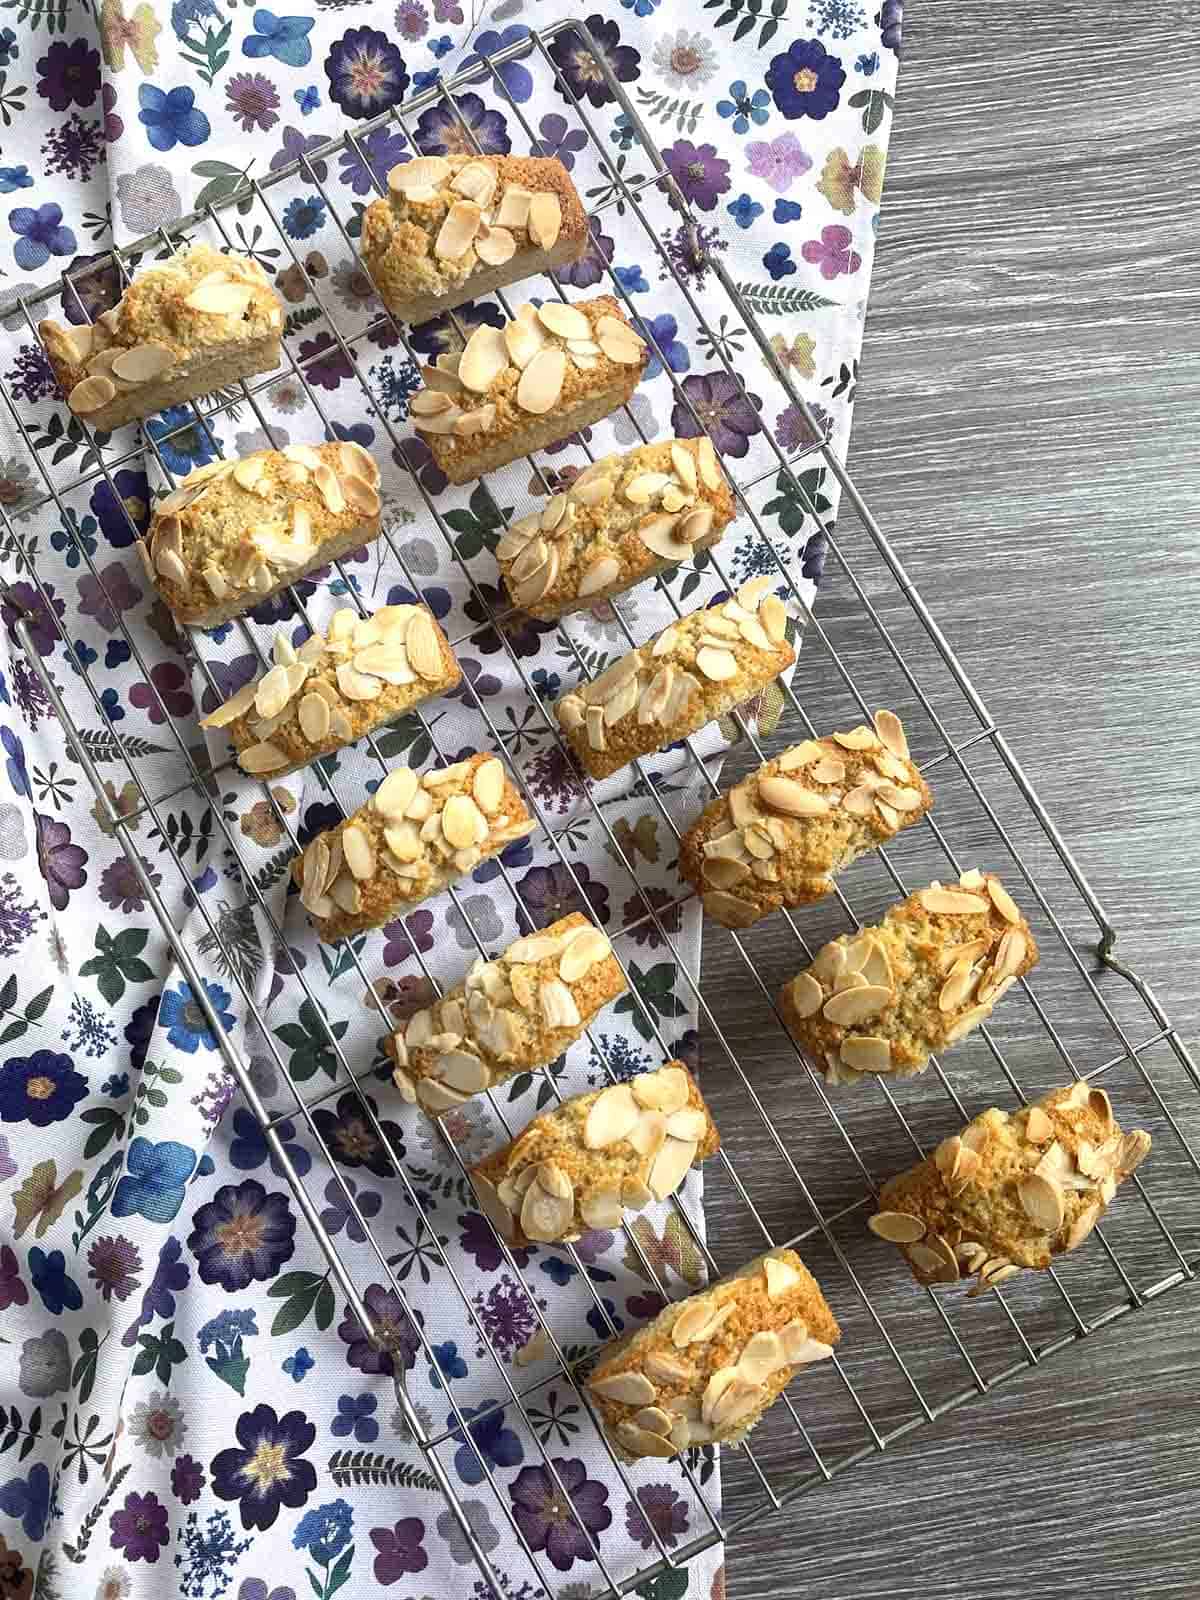 almond cakes on a cooling rack.